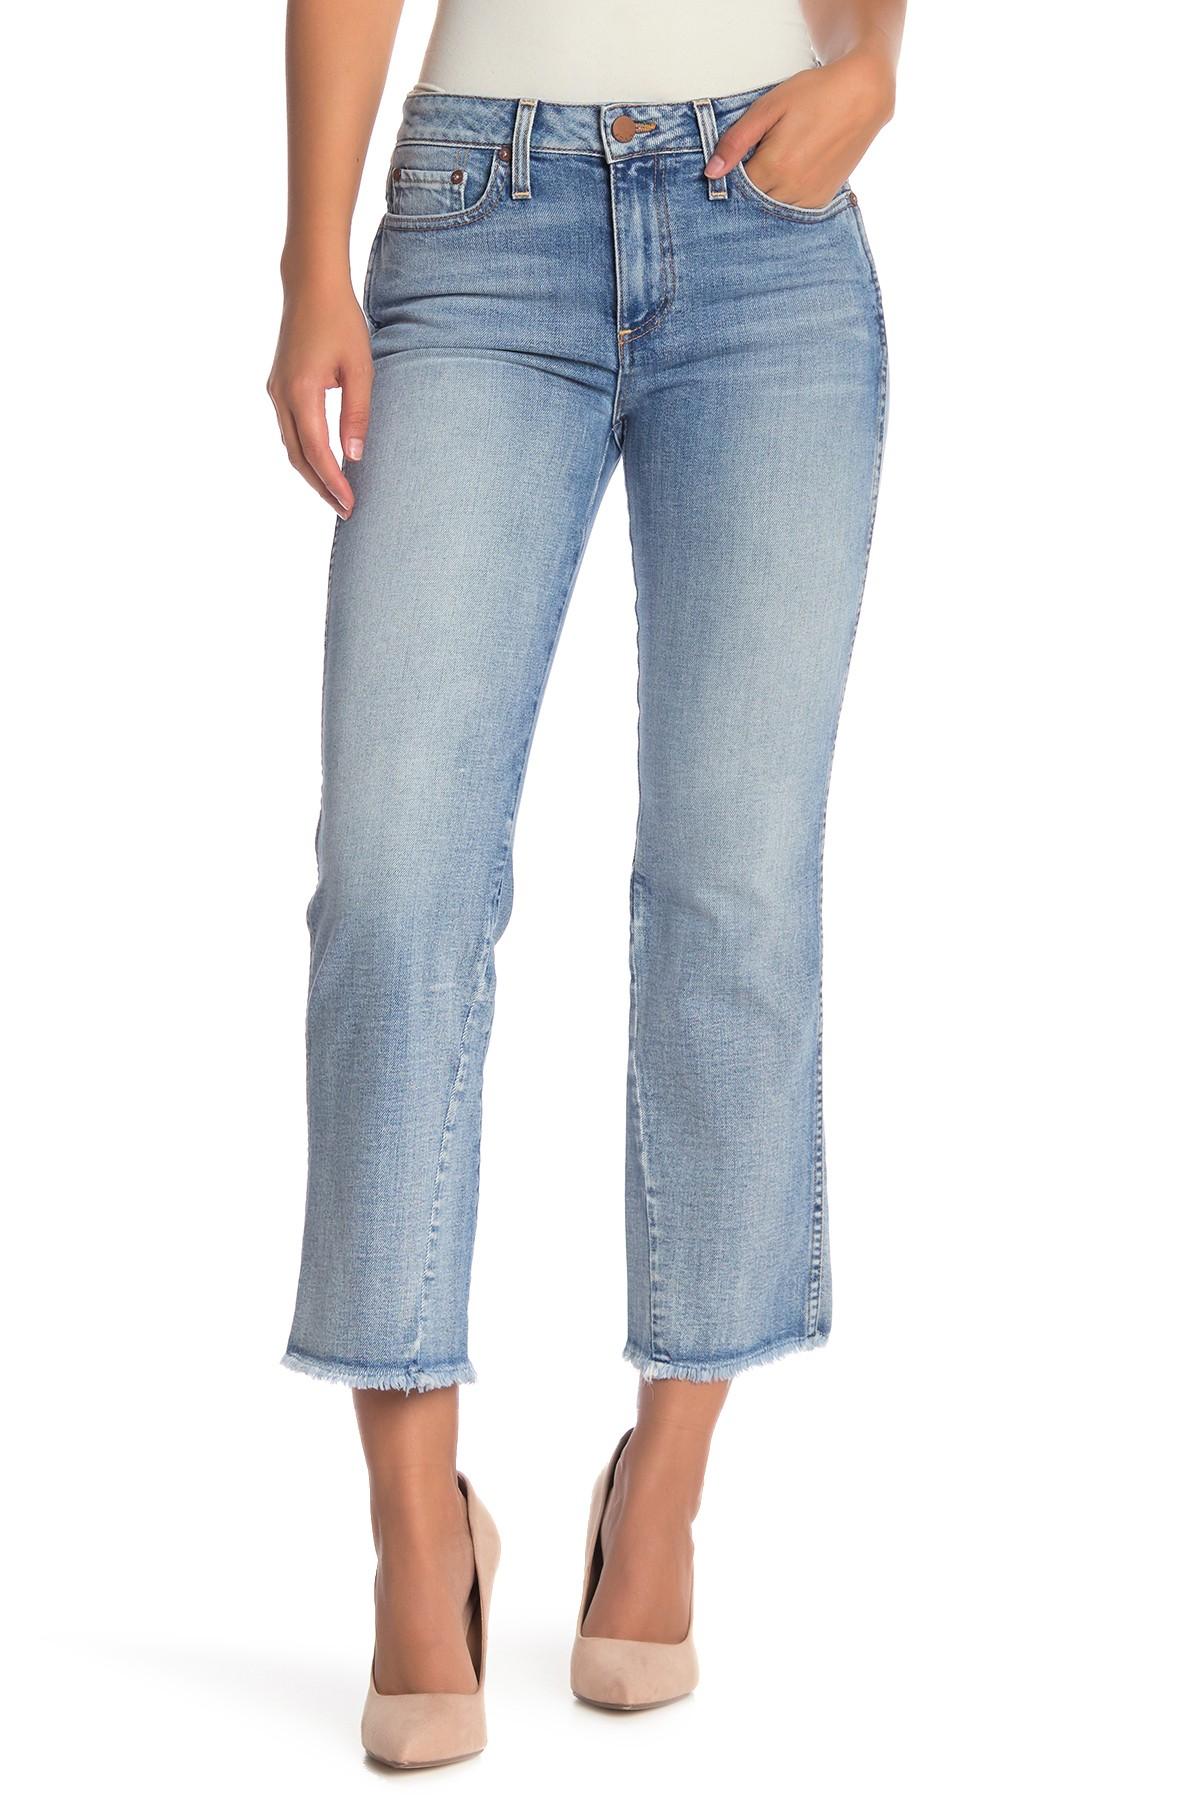 Alice + Olivia Denim Perfect Cropped Kick Flare Jeans in Blue - Lyst